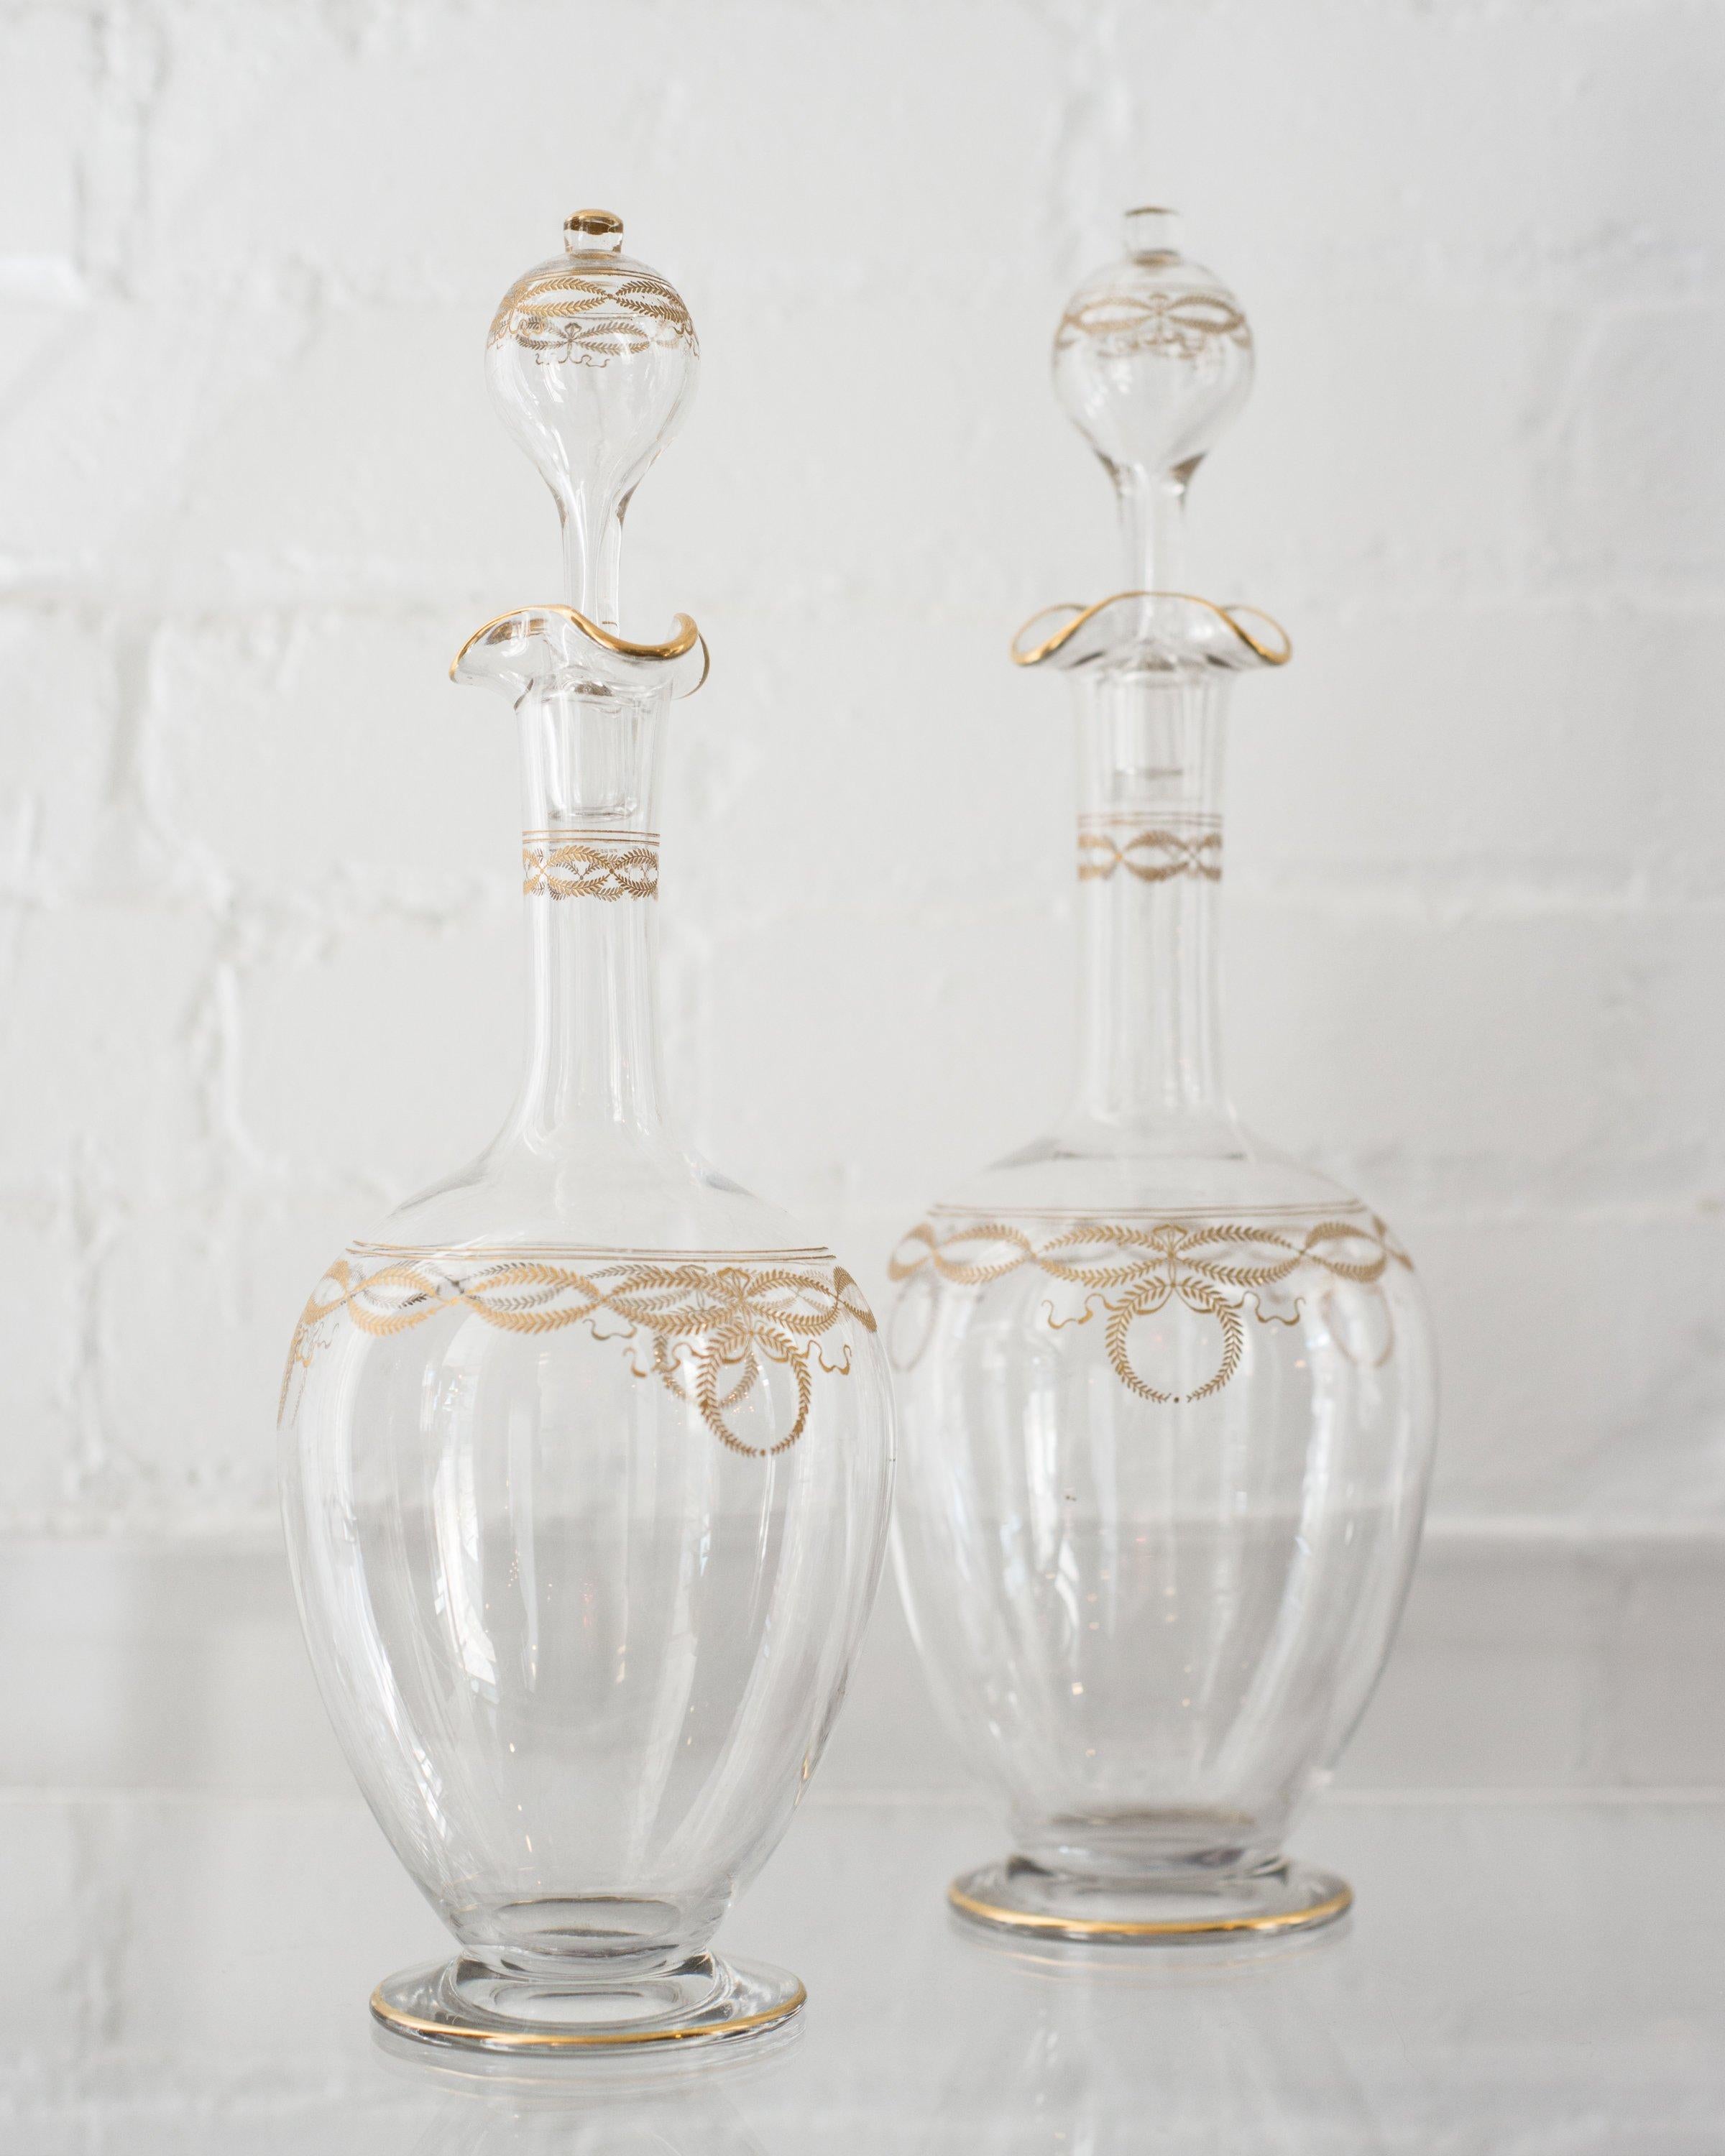 This antique Bohemian gold and glass decanter was originally used for wine. Ornately gilded with delicate wreathes around neck, body and stopper. Today it can be used to serve a wide variety of drinks such as orange juice or water.